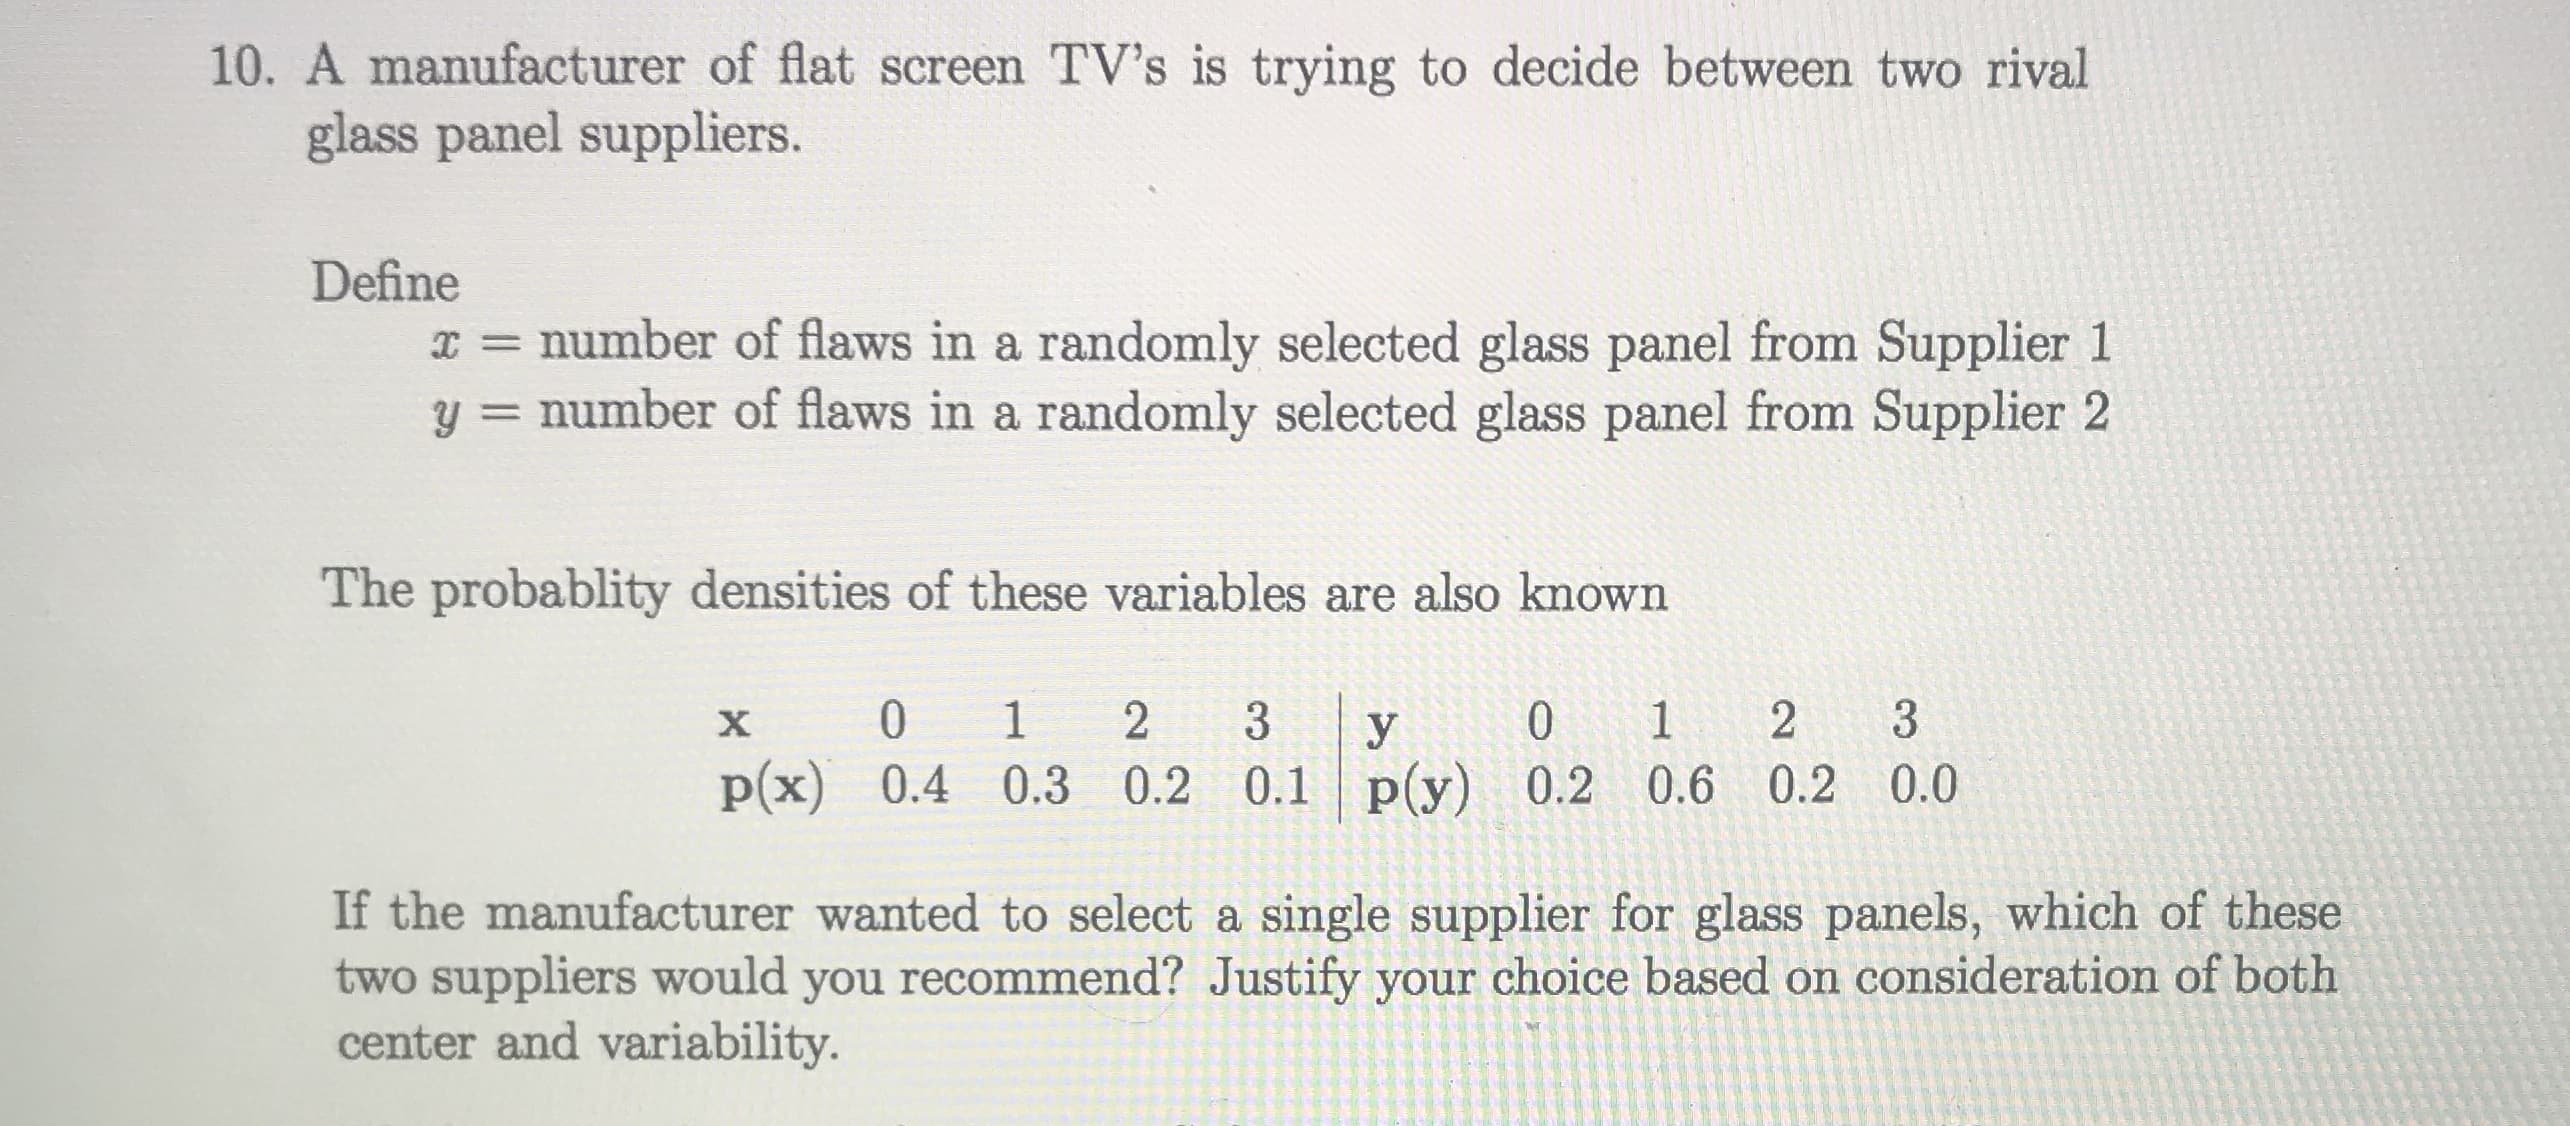 A manufacturer of flat screen TV's is trying to decide between two rival
glass panel suppliers.
Define
I = number of flaws in a randomly selected glass panel from Supplier 1
y = number of flaws in a randomly selected glass panel from Supplier 2
%3D
The probablity densities of these variables are also known
1 2
p(x) 0.4 0.3 0.2 0.1 p(y) 0.2 0.6 0.2 0.0
х
2
3
If the manufacturer wanted to select a single supplier for glass panels, which of these
two suppliers would you recommend? Justify your choice based on consideration of both
center and variability.
